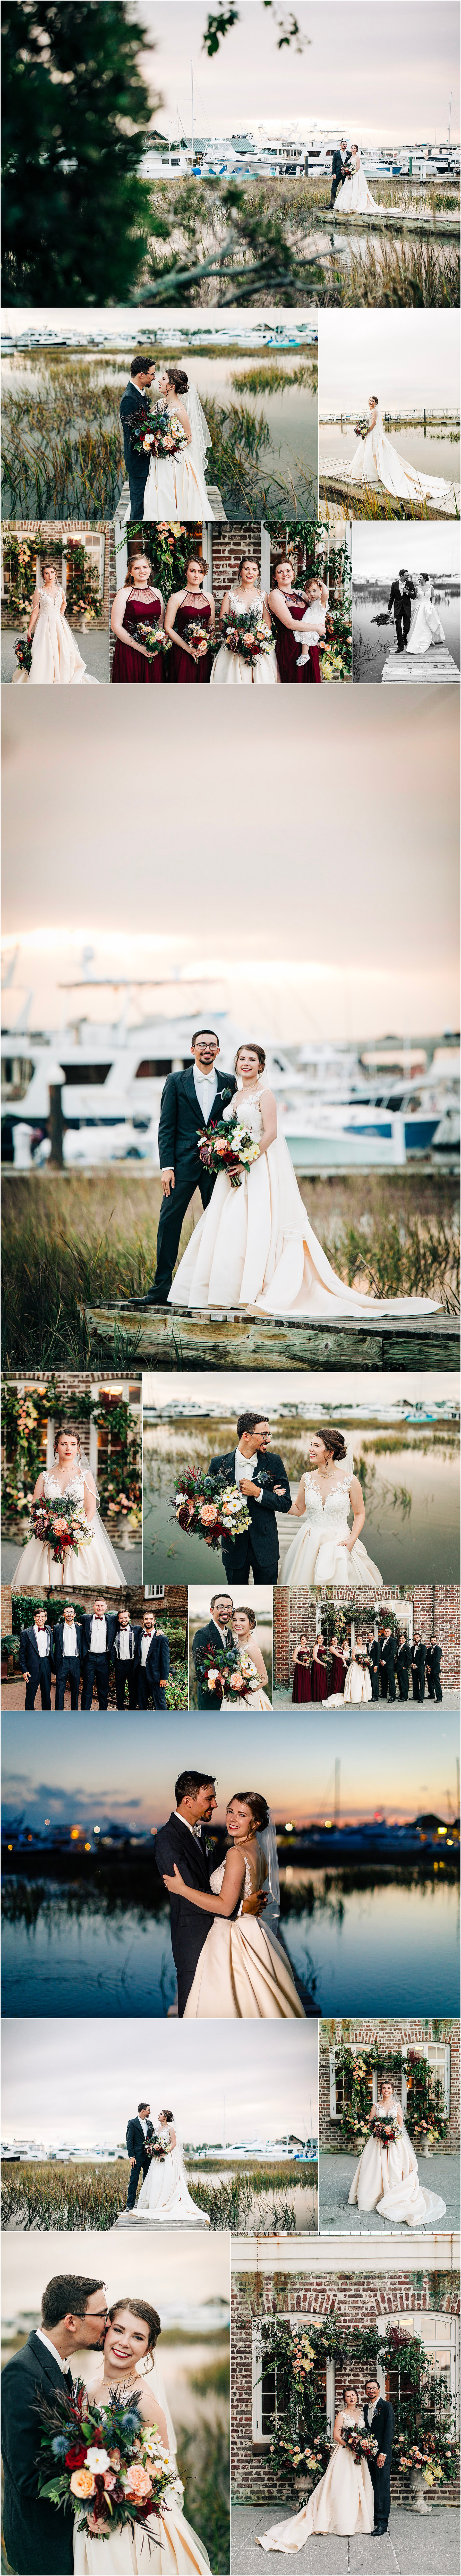 A Timeless Wedding at the Historic Rice Mill- Couple
